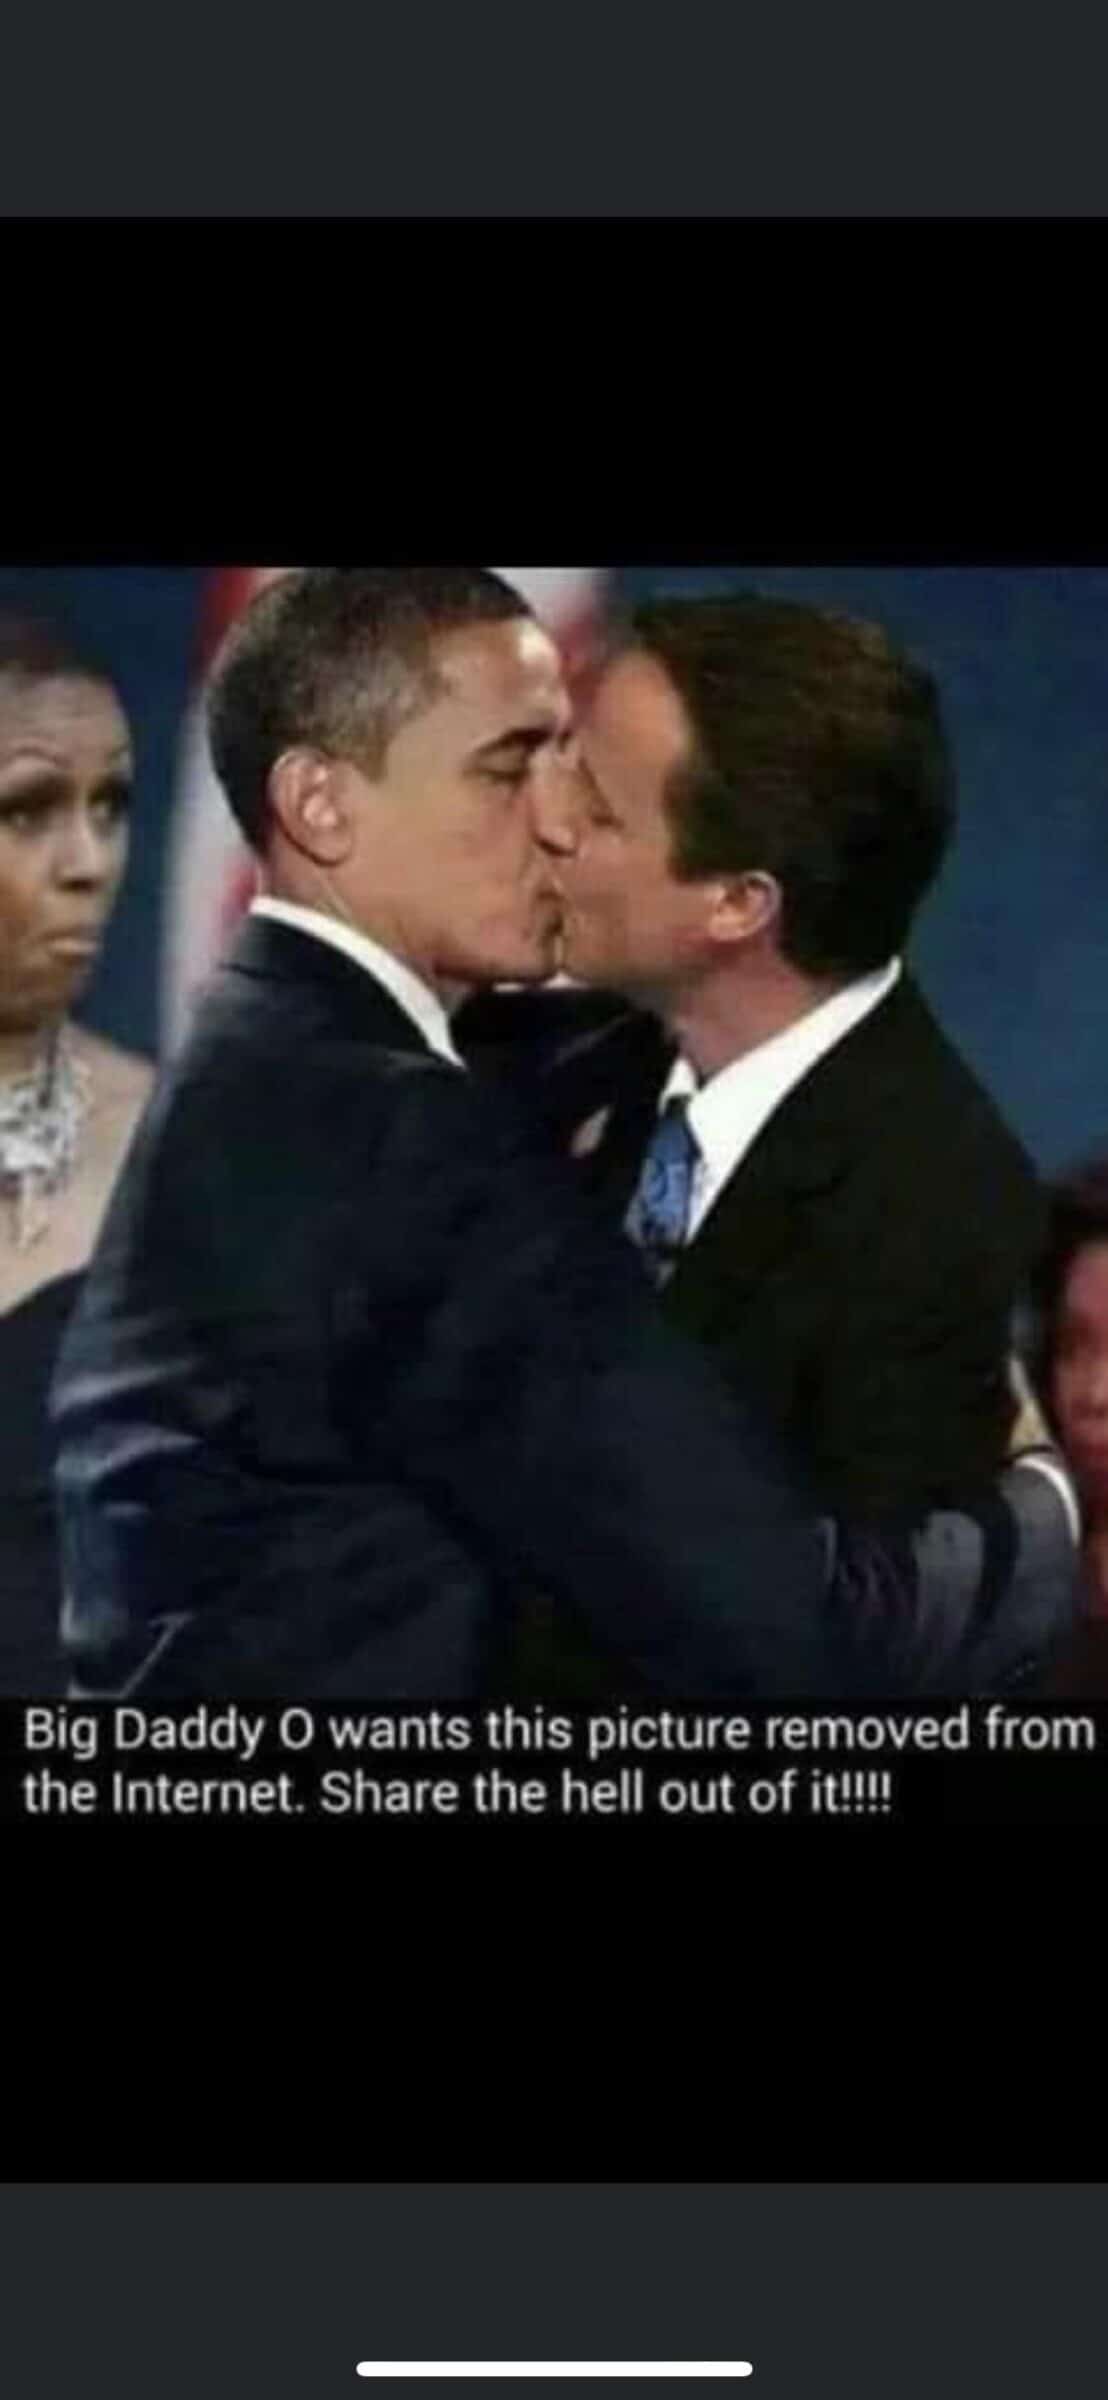 Political, Big Daddy boomer memes Political, Big Daddy text: Big Daddy O wants this picture removed from the Internet. Share the hell out of it!!!! 